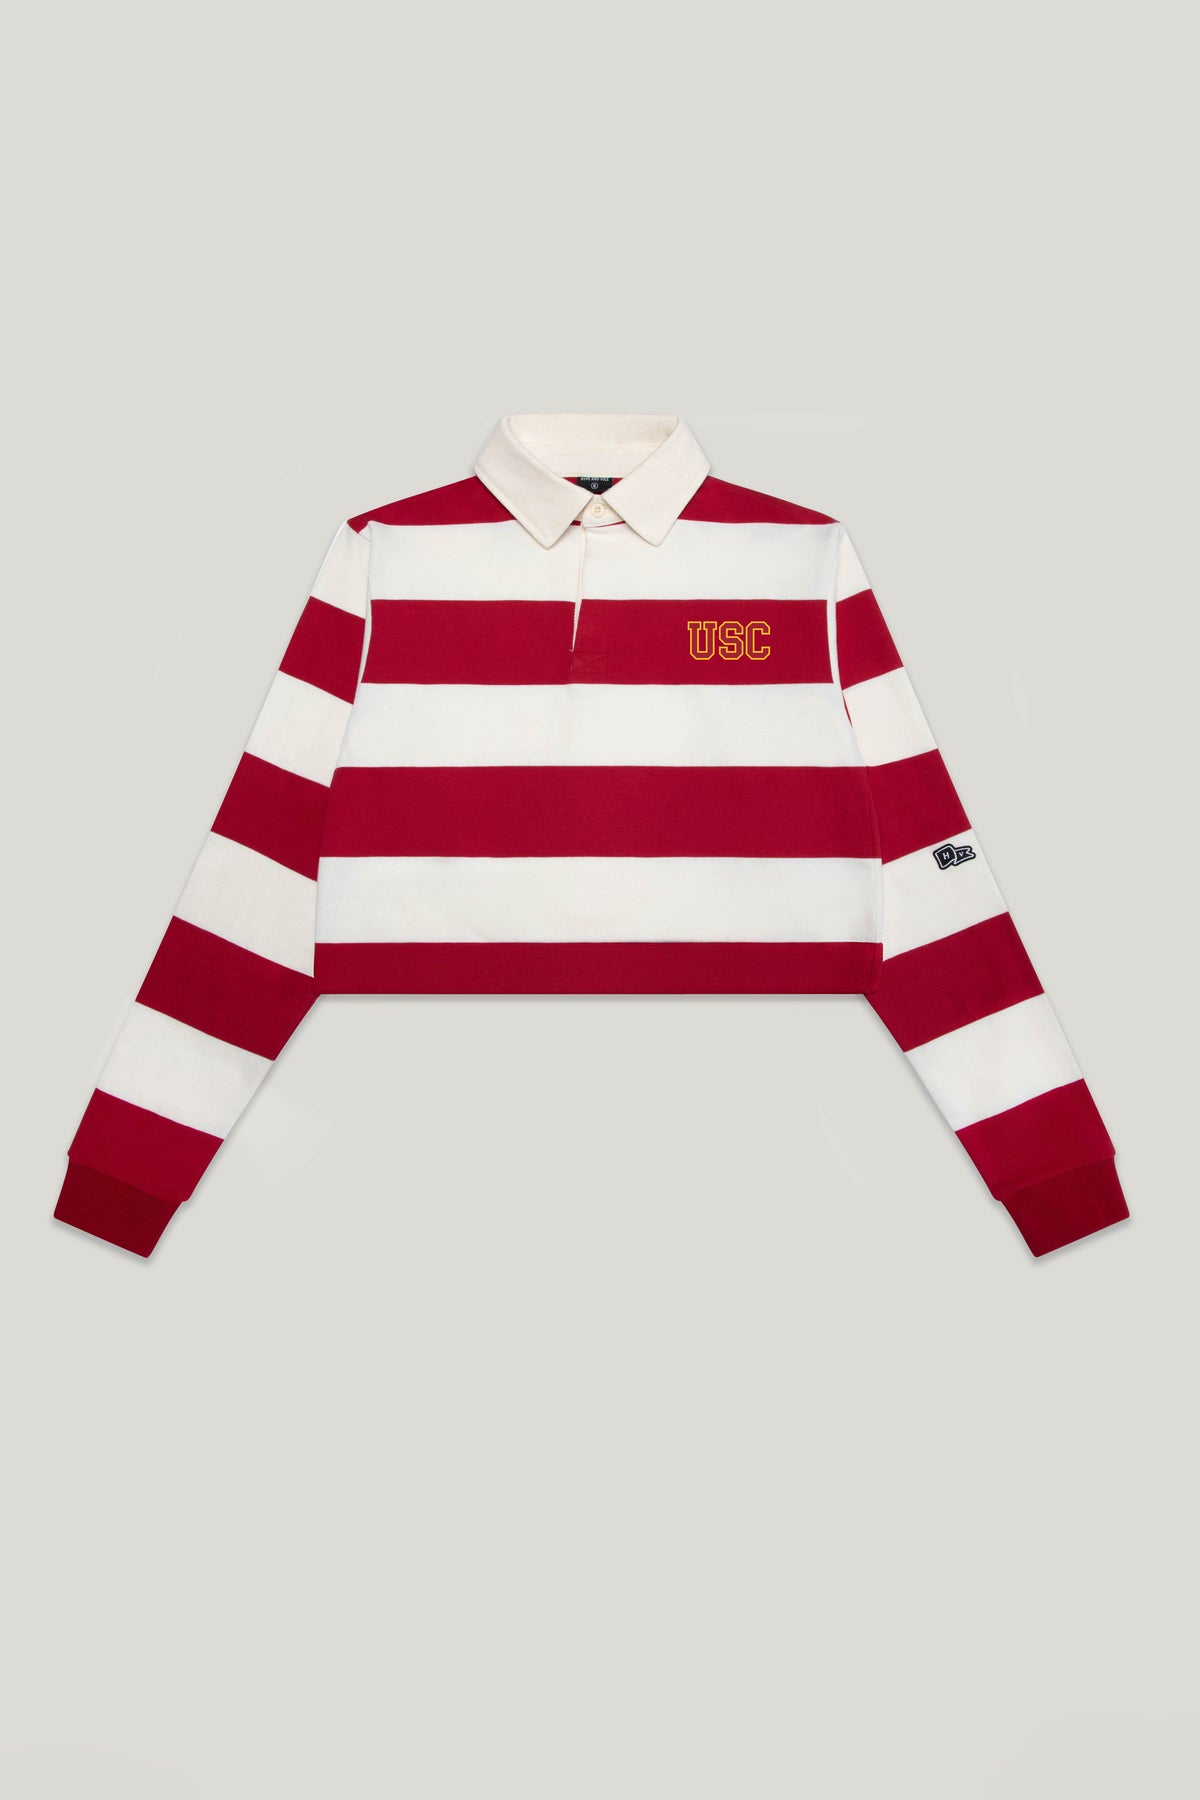 USC Rugby Top